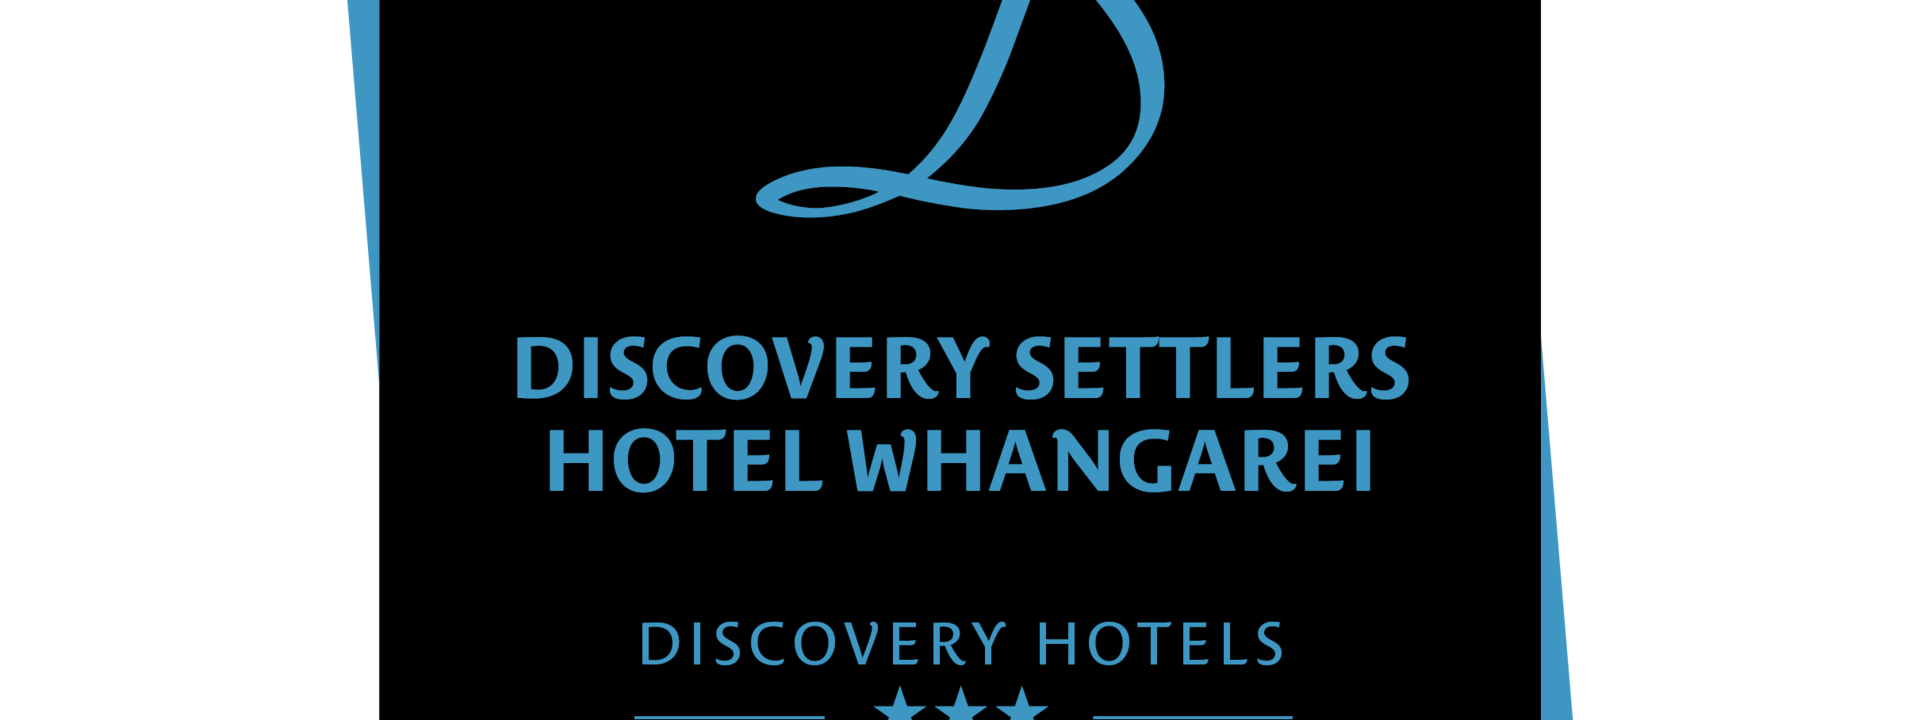 Discovery Settlers Hotel Whangarei logo4 PNG.png